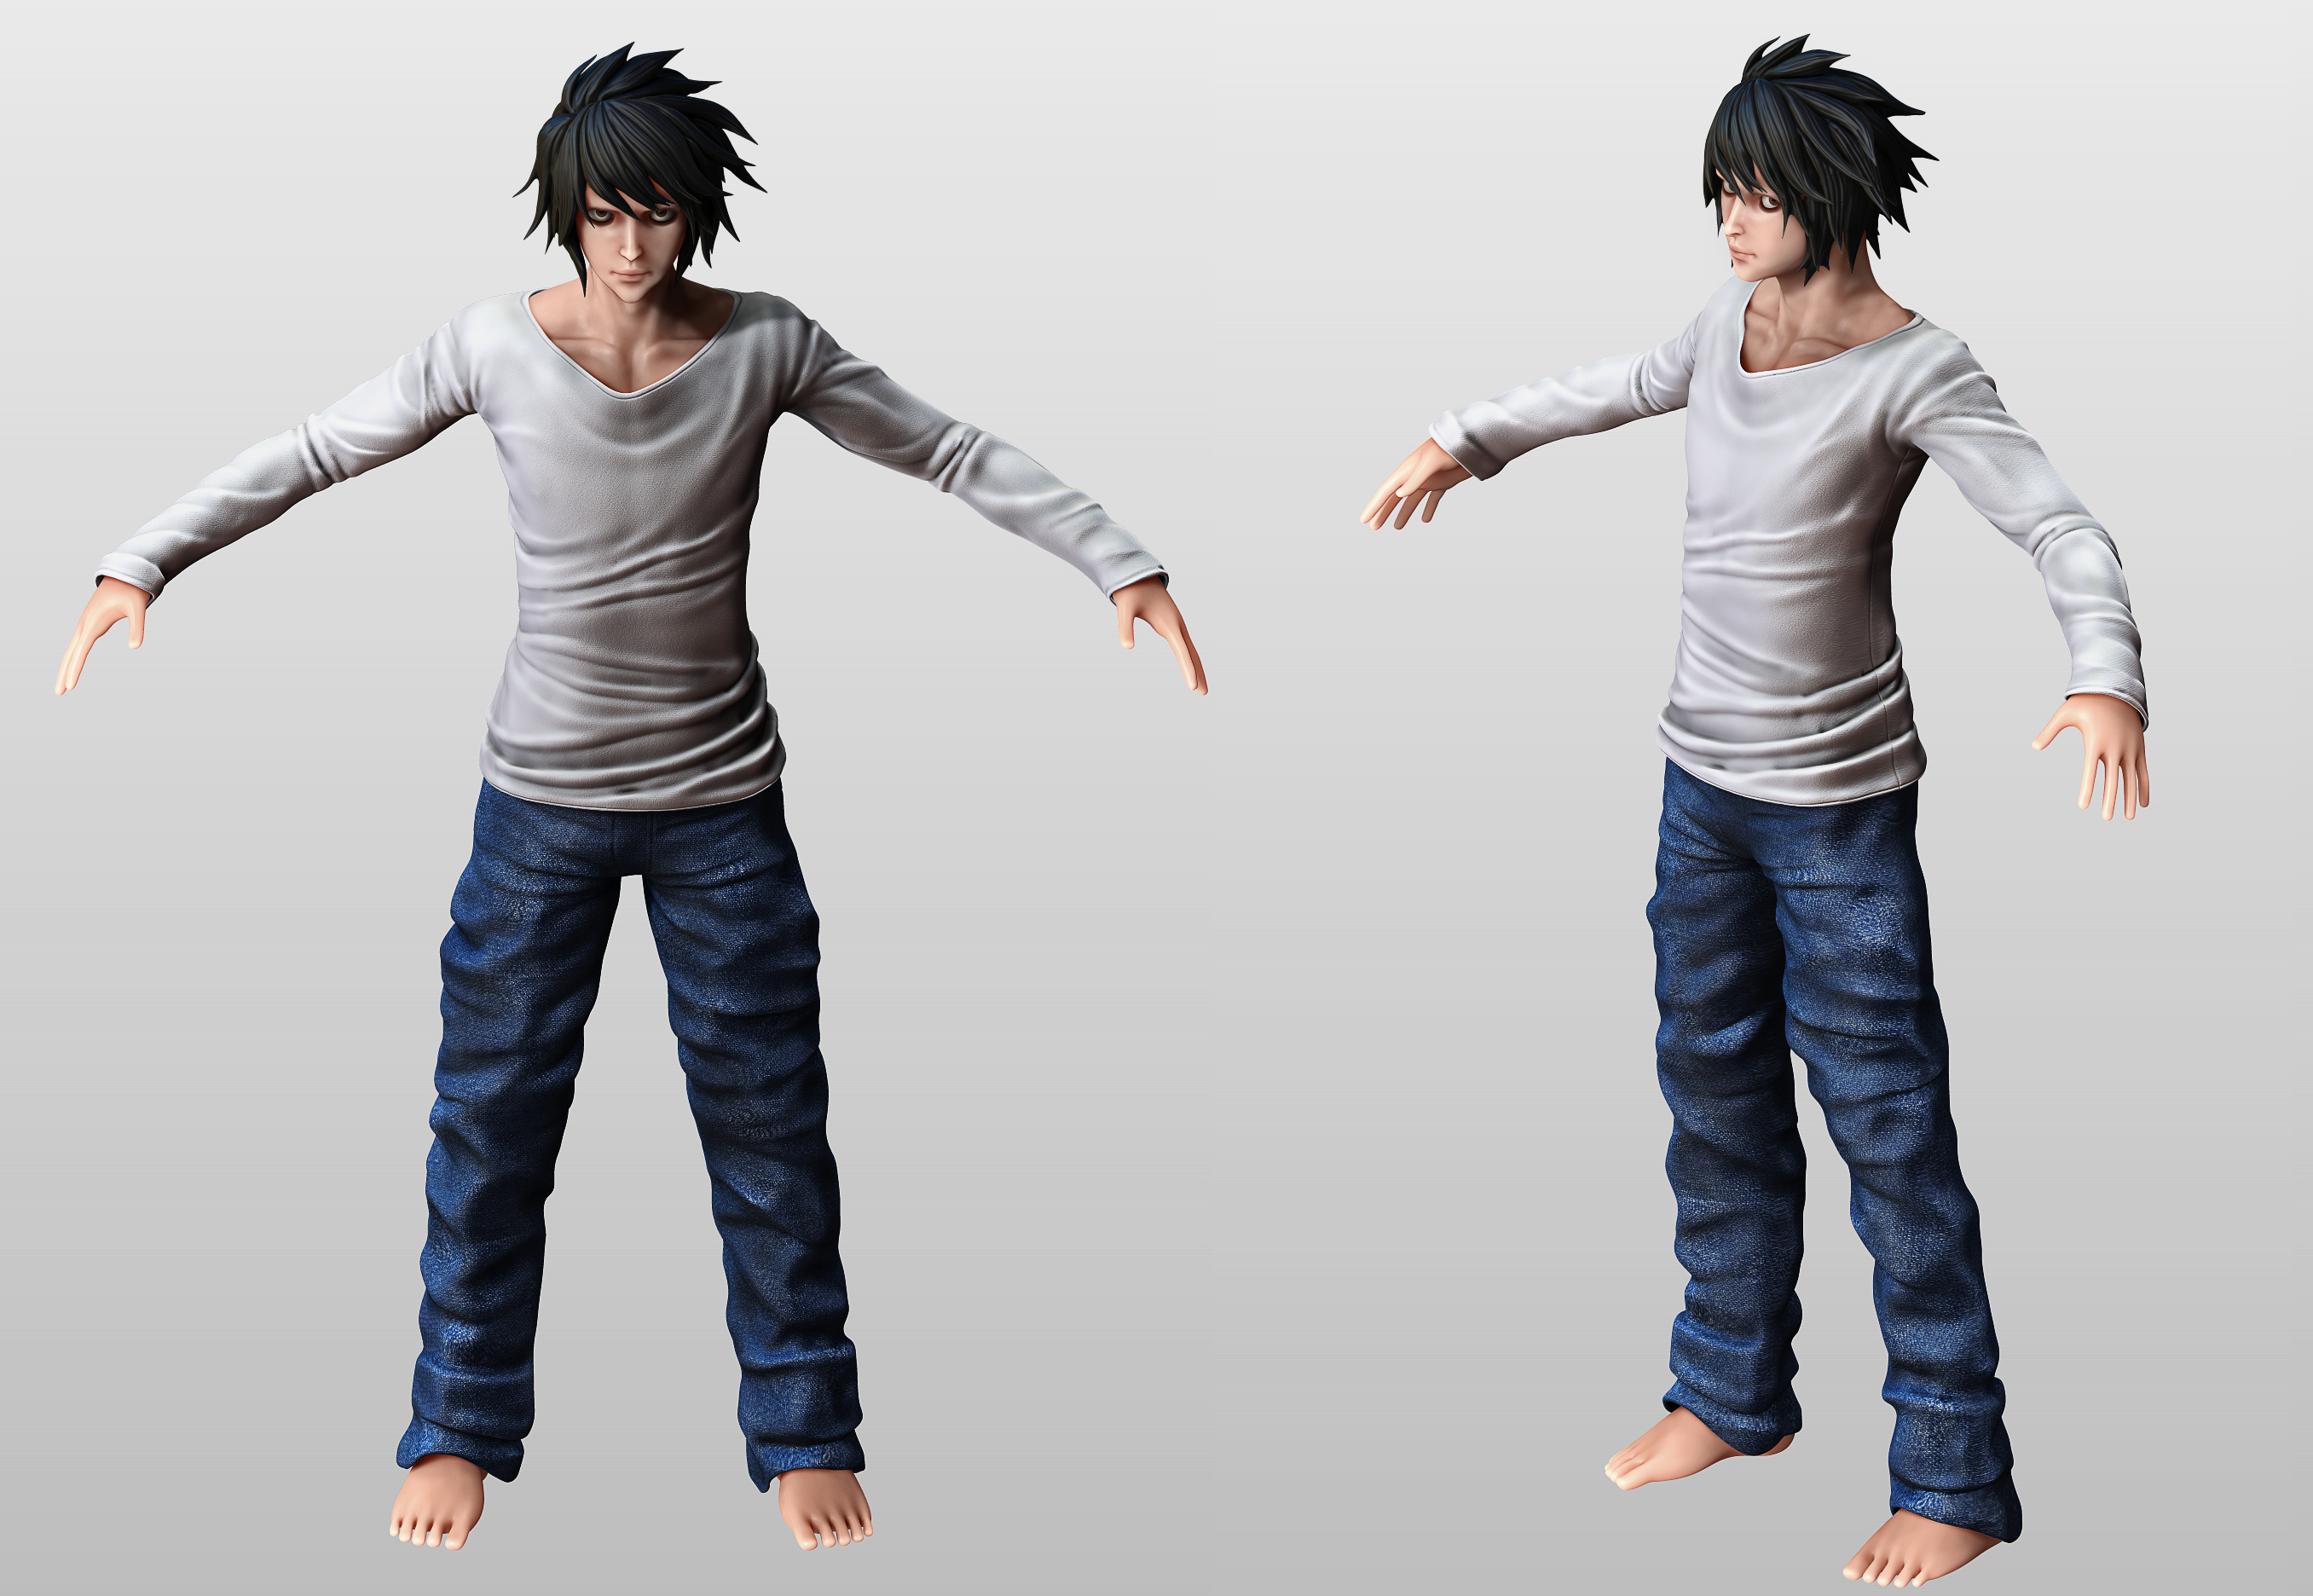 Doku  Lawliet  Law L__death_note__wip2_by_tetsuok9999-d64qjdn